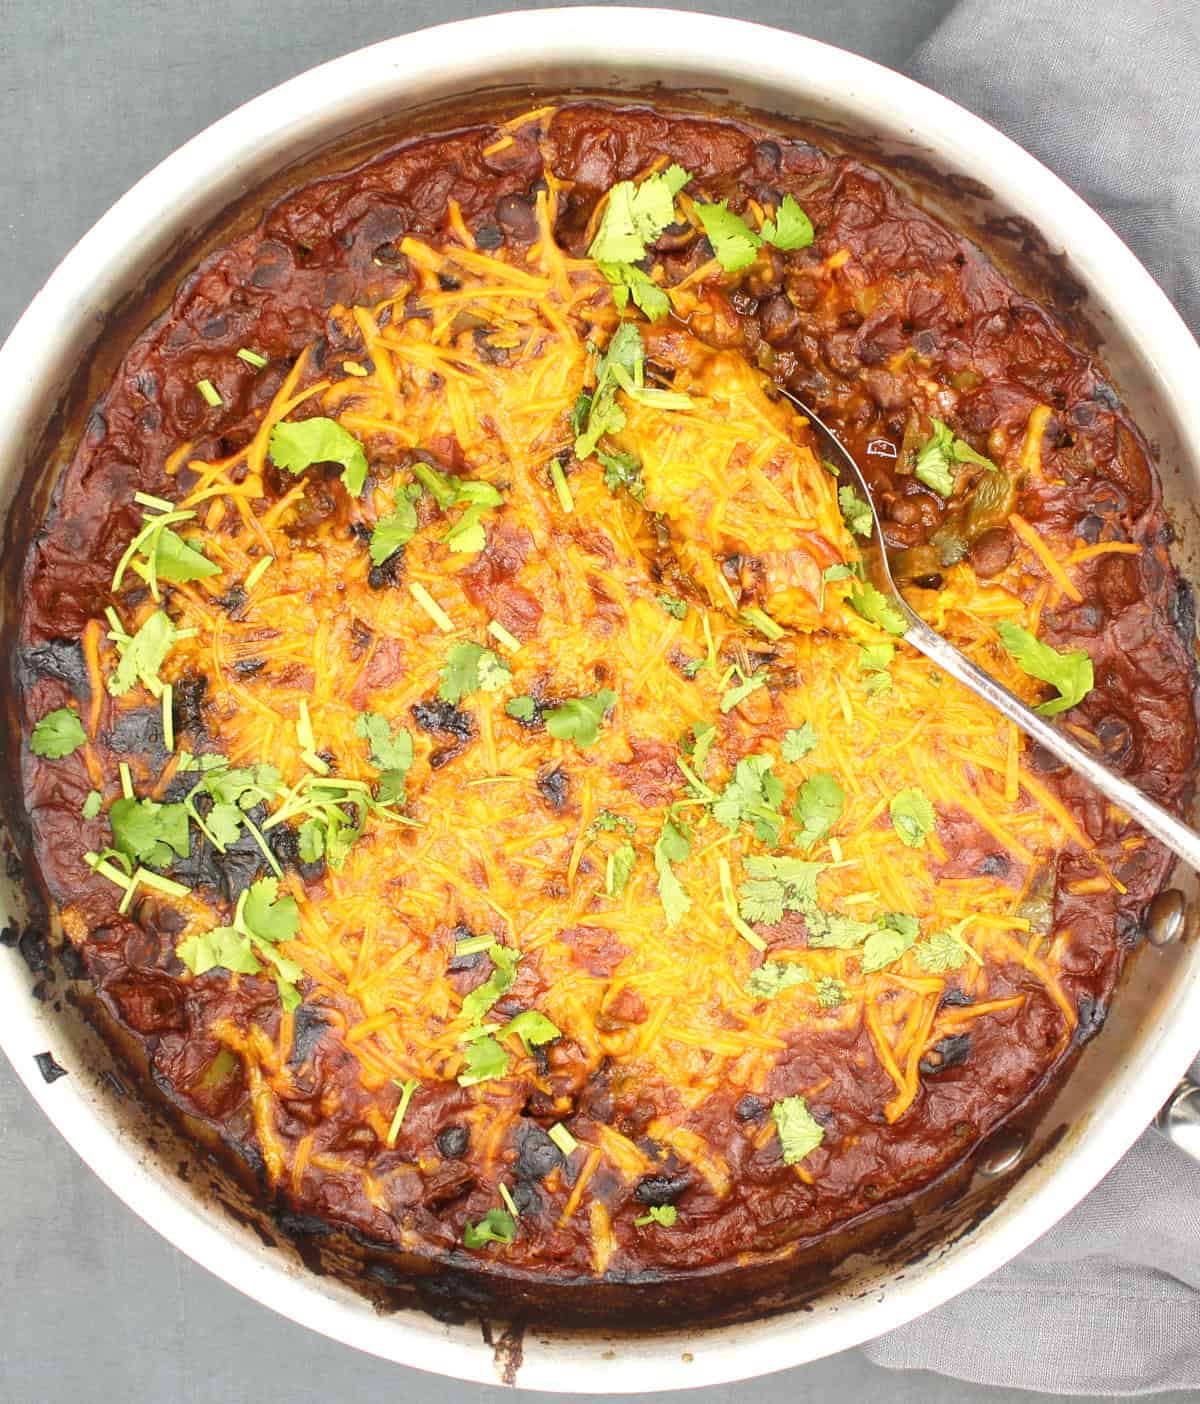 Overhead partial photo of a vegan black bean casserole made in the Mexican style.